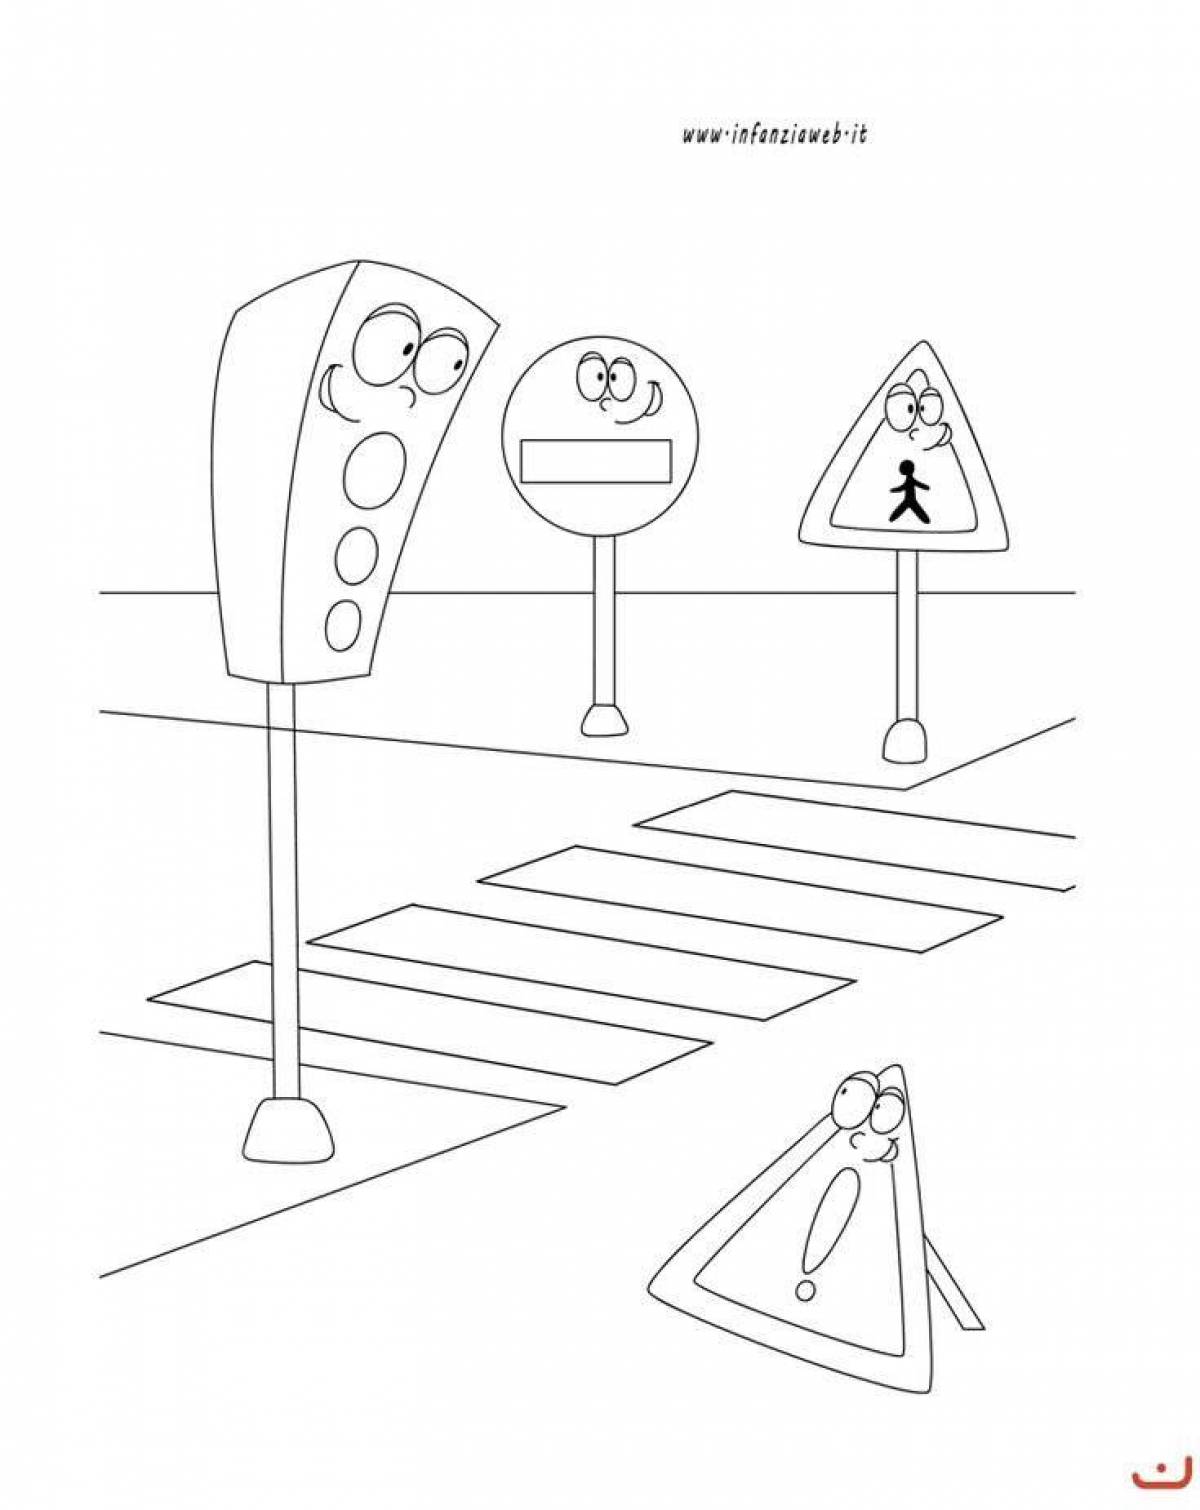 Crossing coloring page